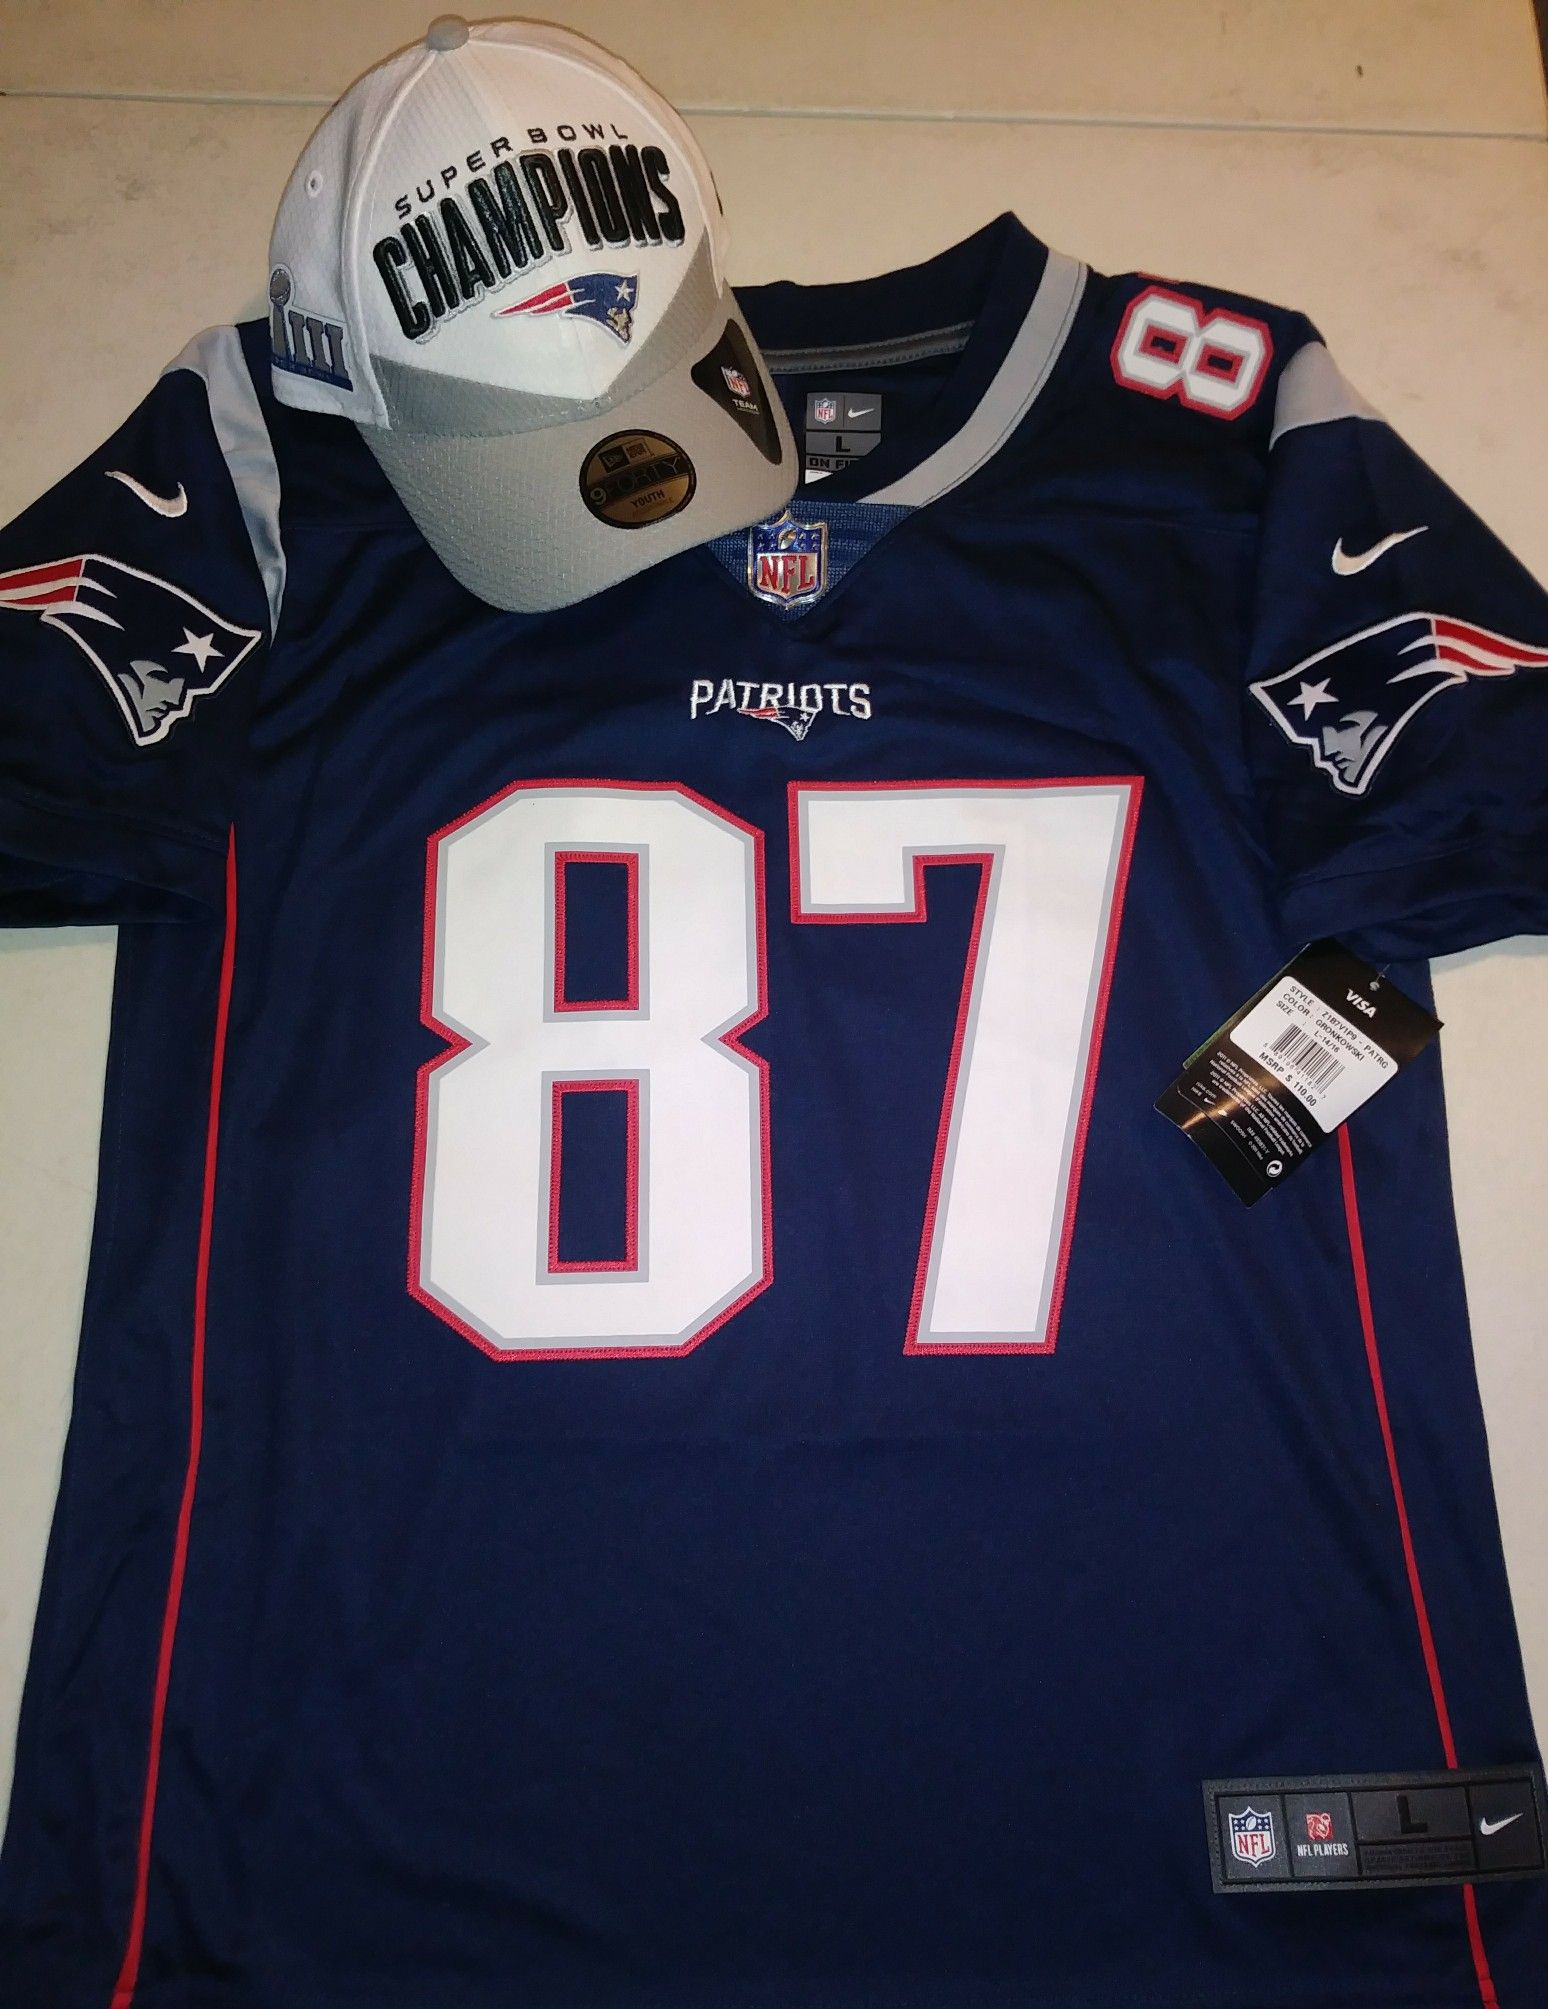 Gronk jersey for youth w/hat